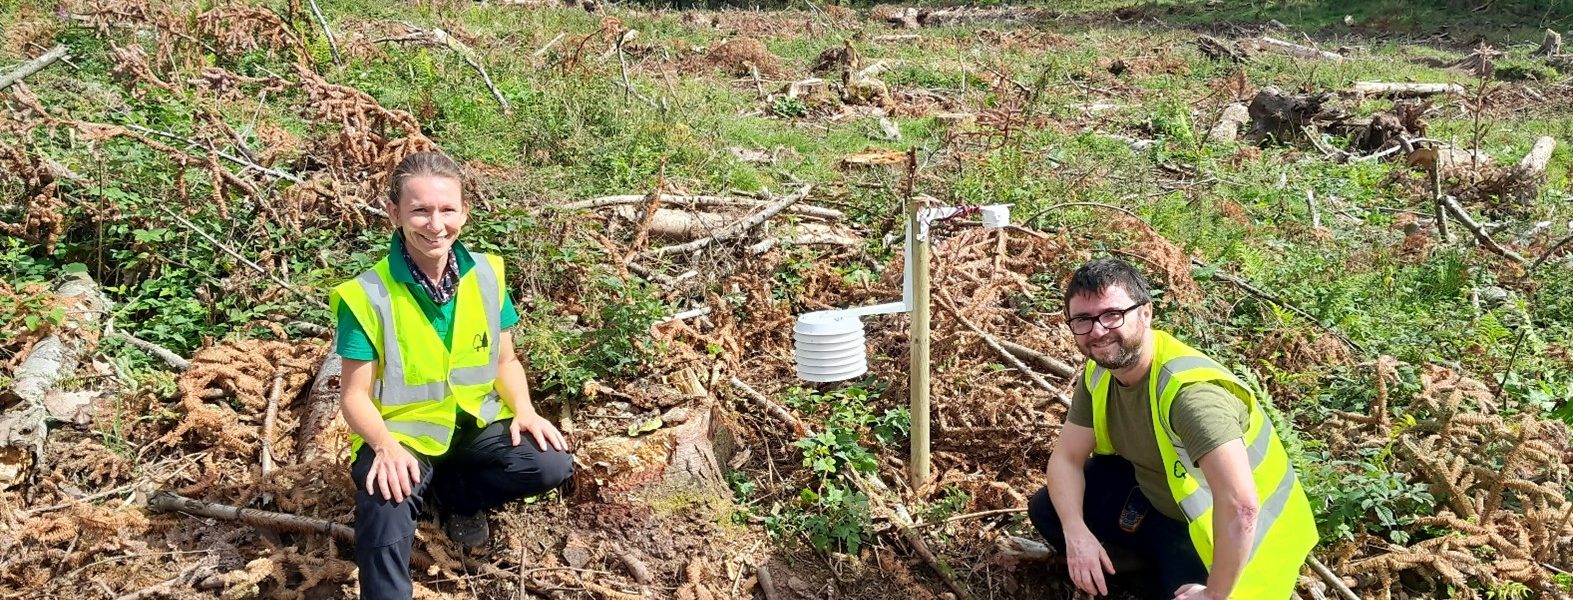 Leone Olivieri and Racheal Lee by monitoring instrumentation in an area of recently-felled woodland.